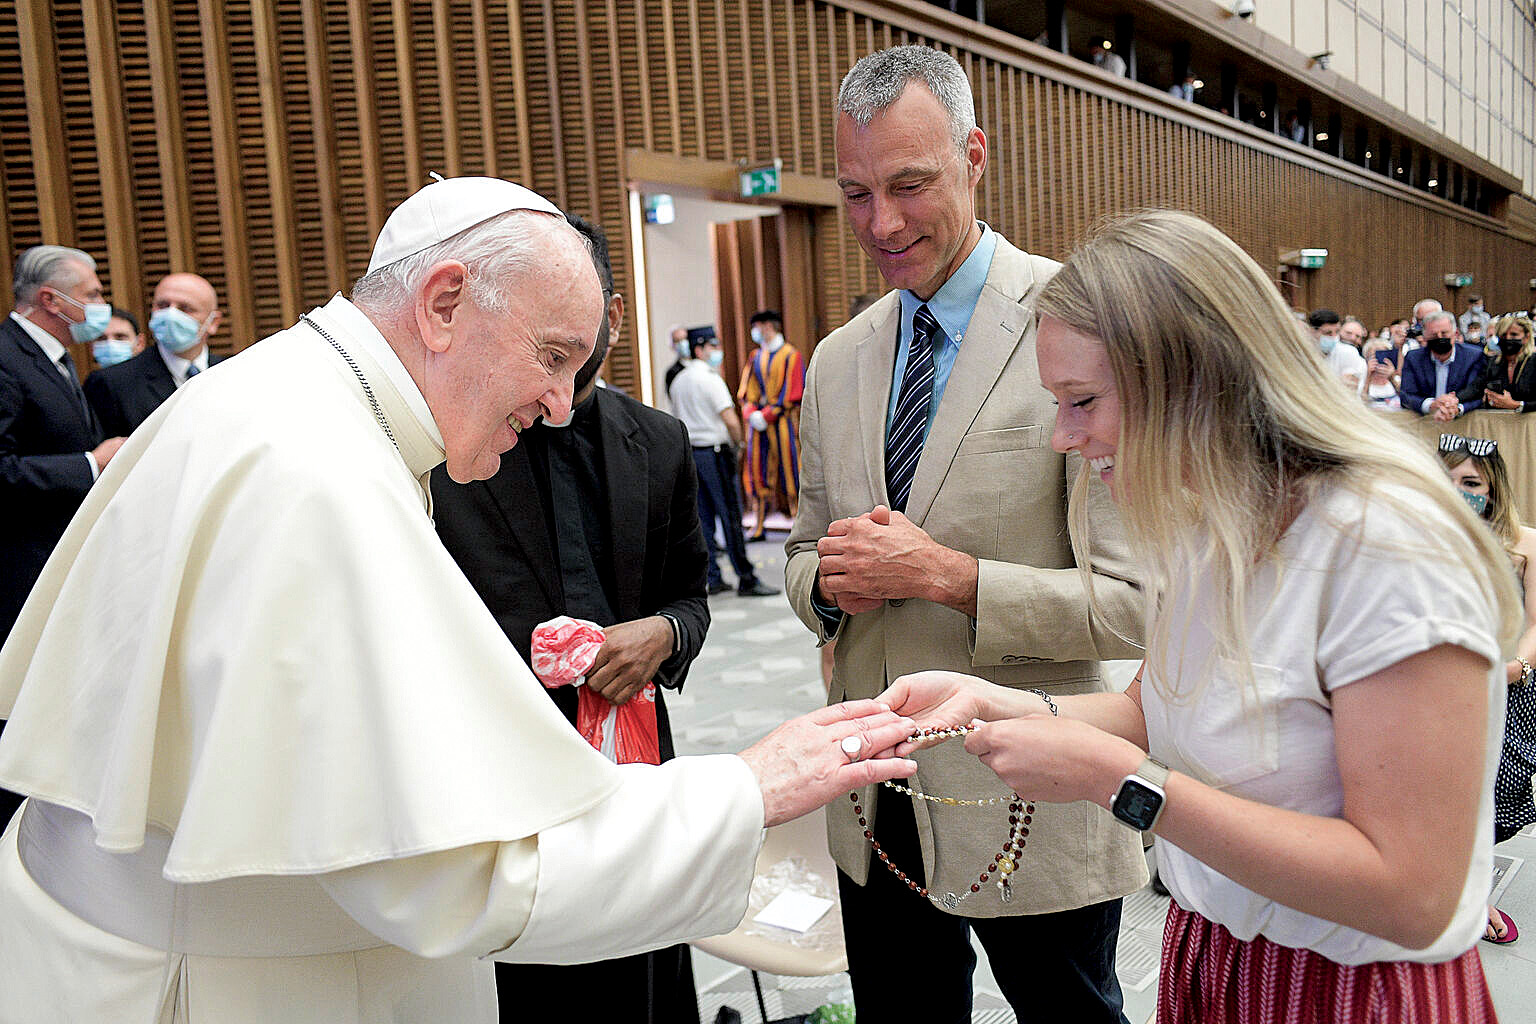 Joined by Austrian Program Director Tom Wolter, Ashley Buck visits with Pope Francis.